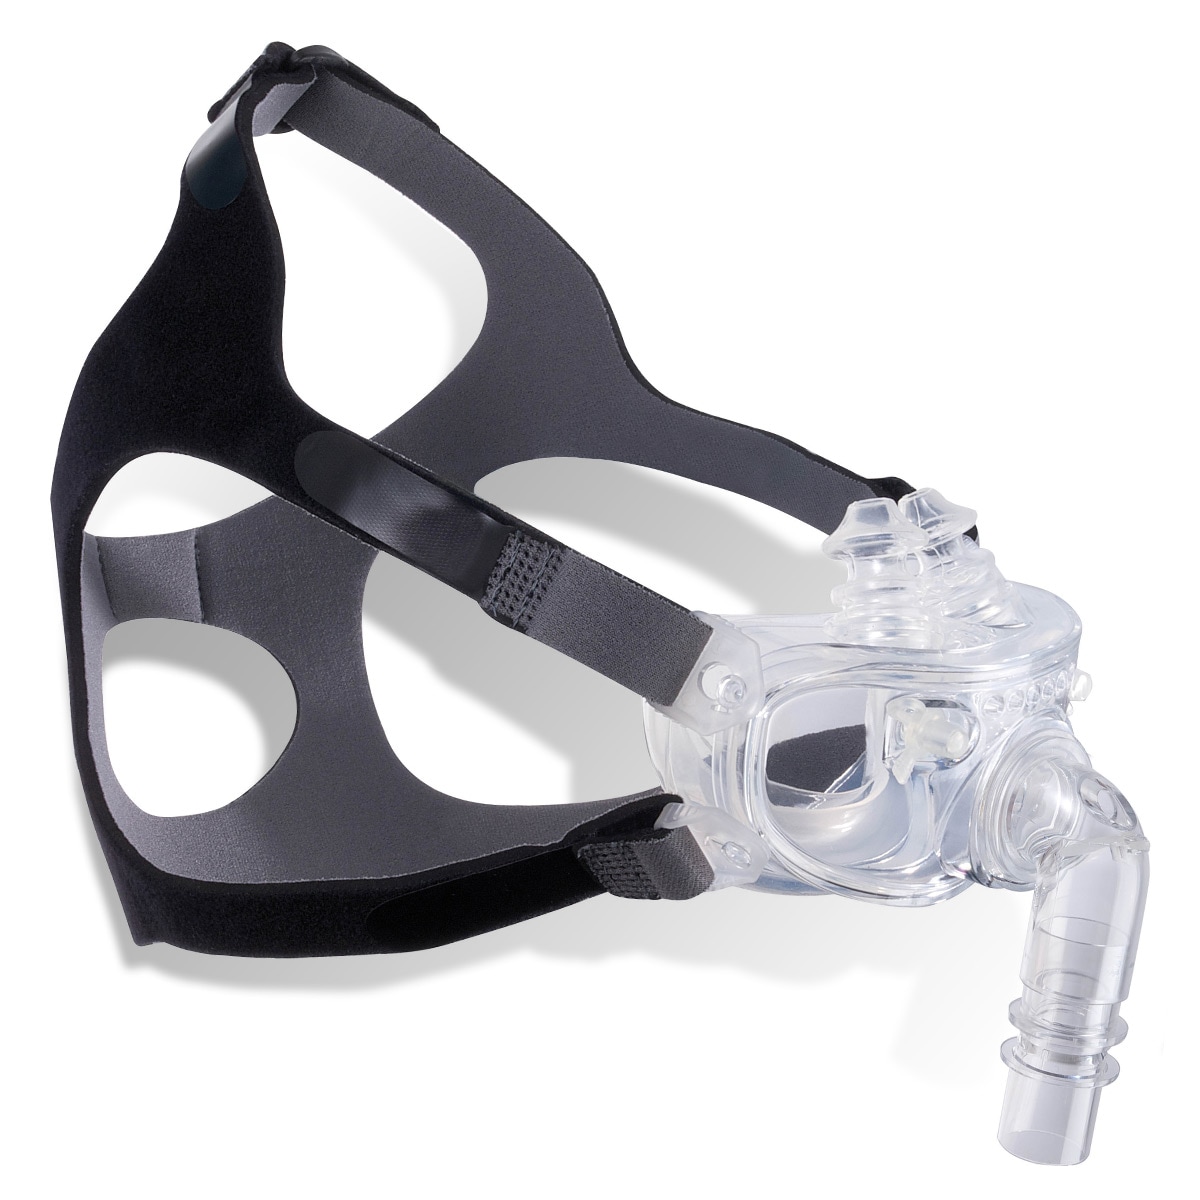 Hybrid CPAP Mask : 30-Night Risk Free Trial : Ships Free